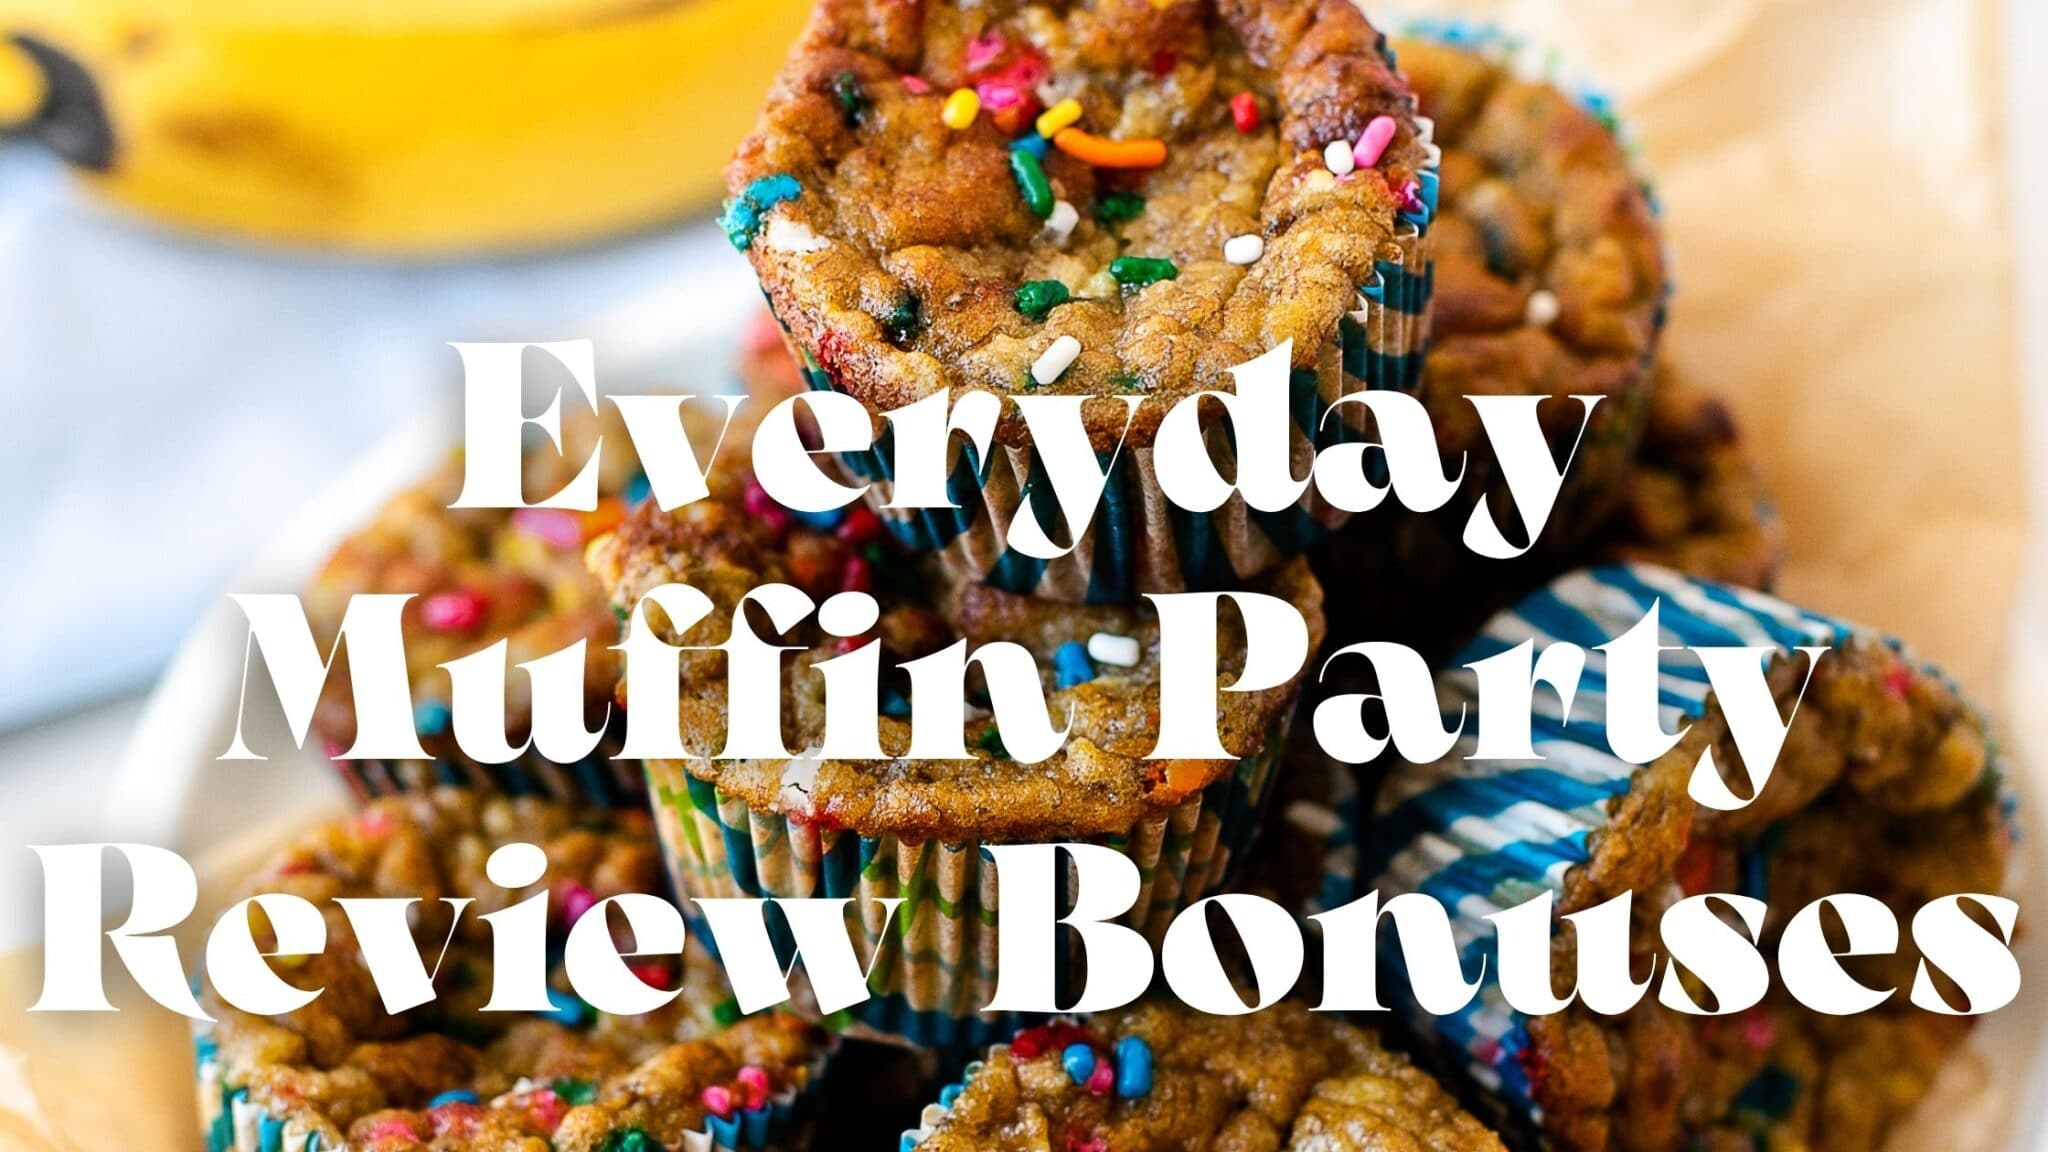 Everyday Muffin Party Cookbook Review Bonuses